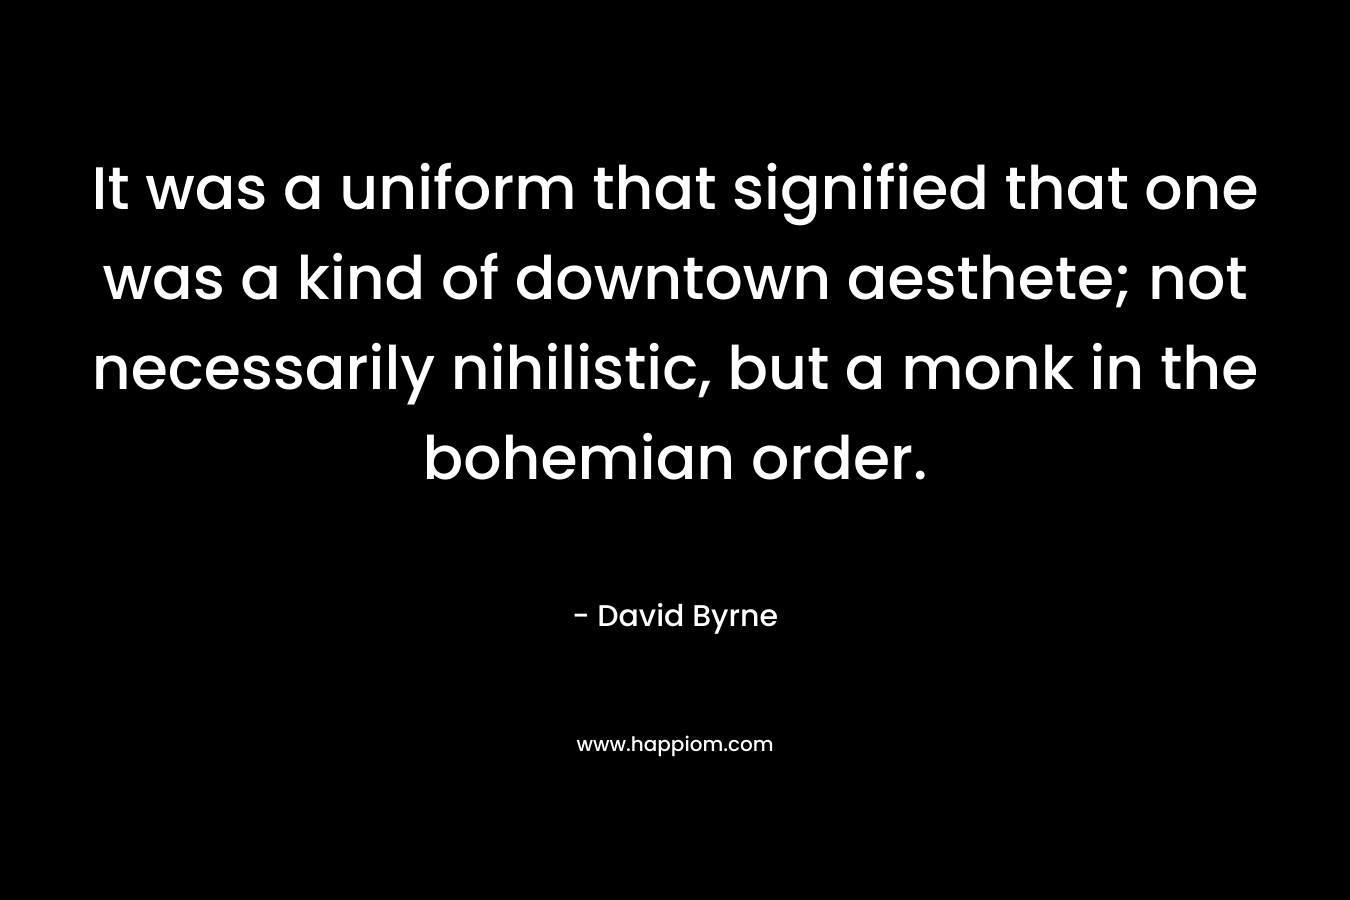 It was a uniform that signified that one was a kind of downtown aesthete; not necessarily nihilistic, but a monk in the bohemian order.